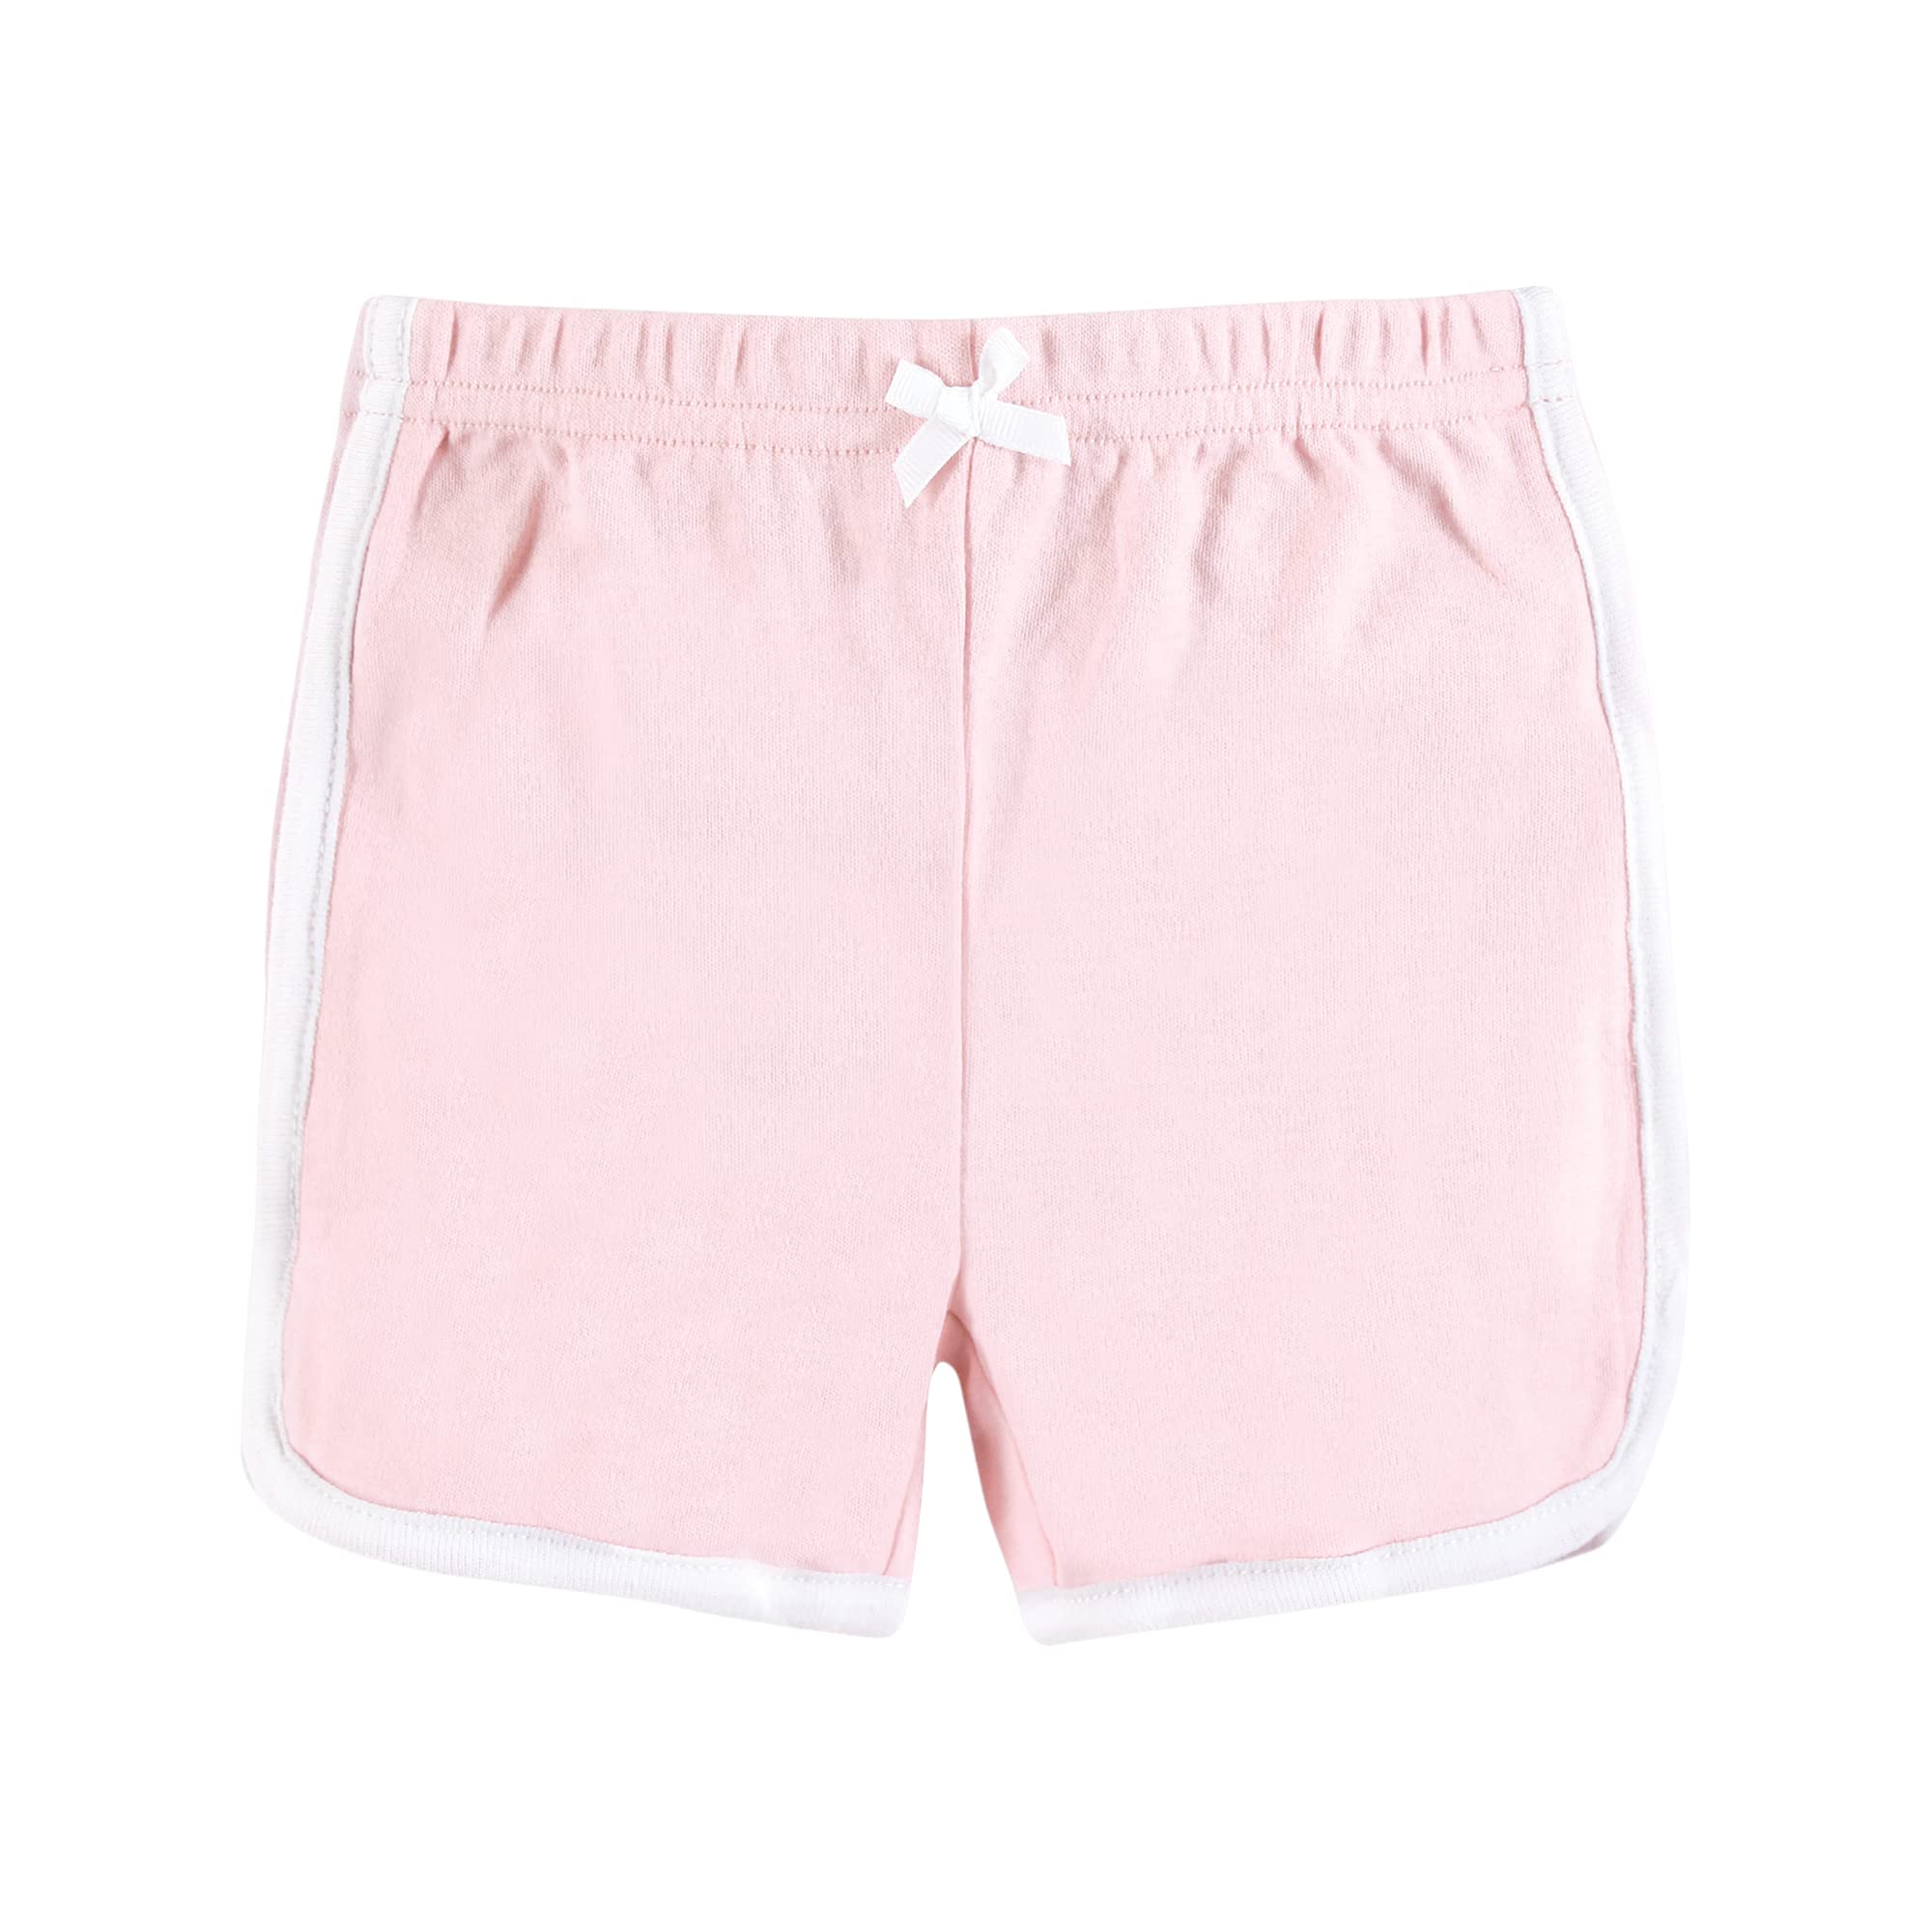 Hudson Baby Unisex Baby and Toddler Shorts Bottoms 4-Pack, Pink Black, 3-6 Months